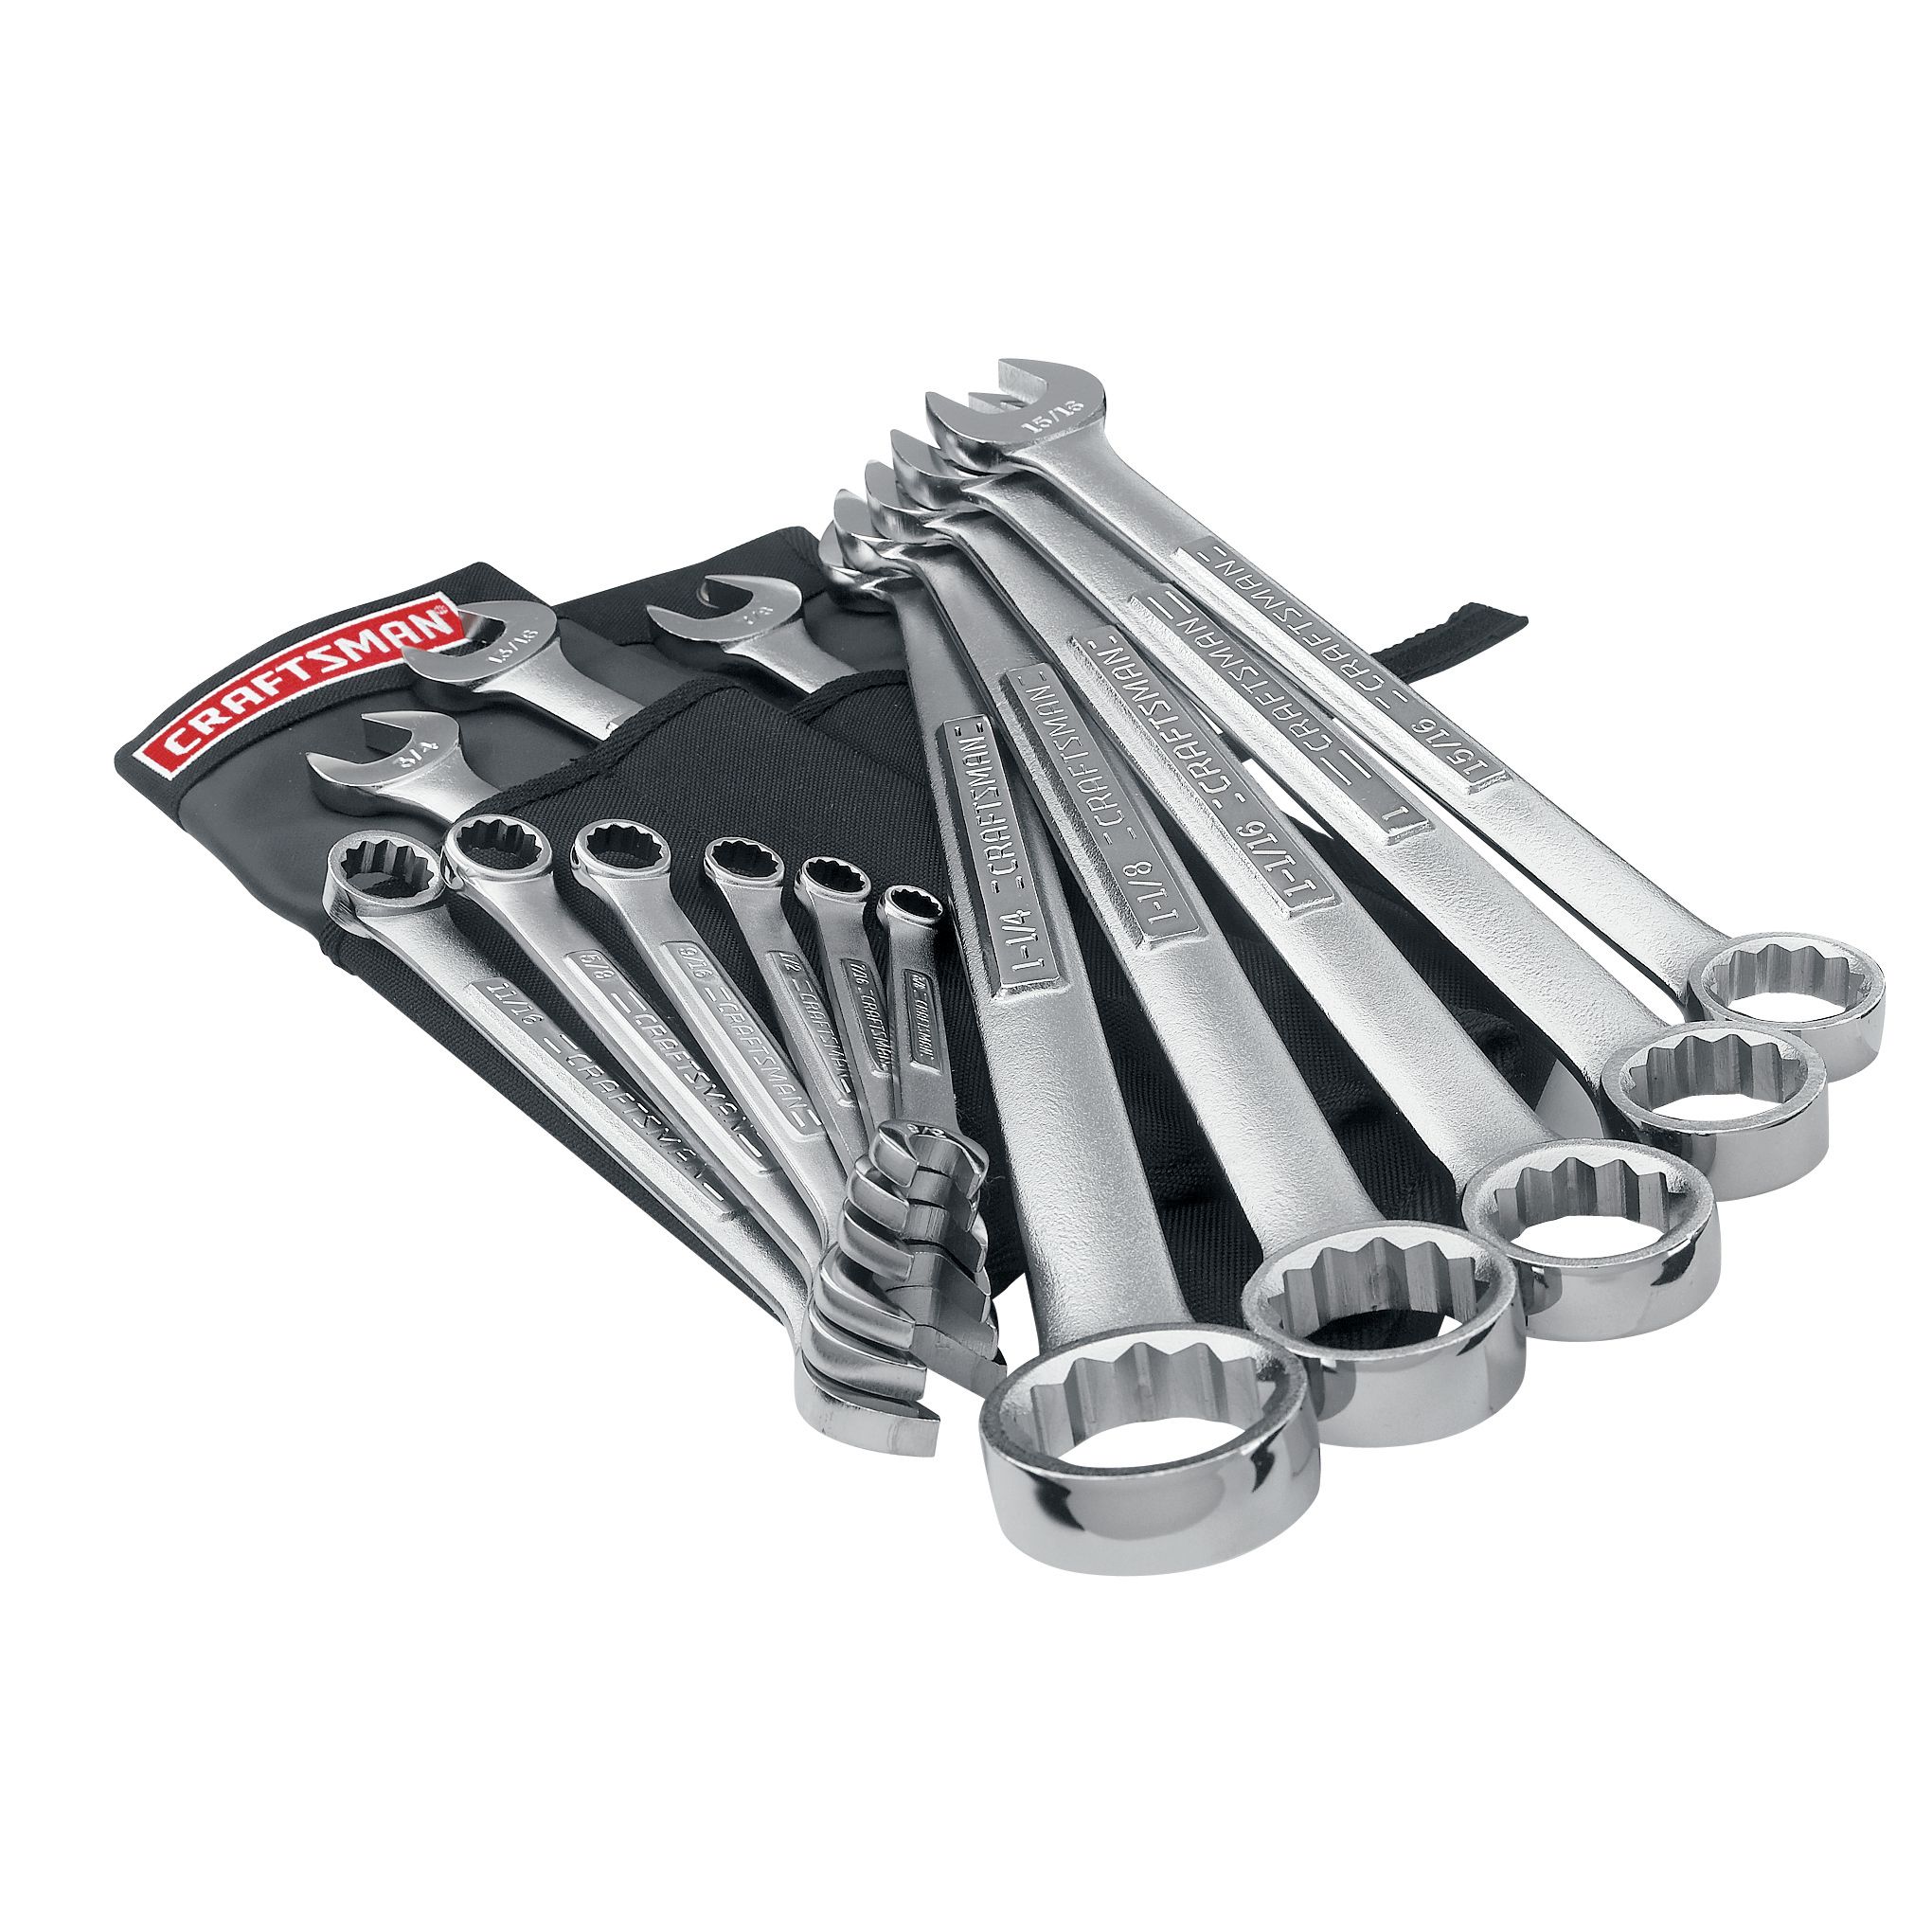 Craftsman 14 pc. Standard 12 pt. Combination Wrench Set with Deluxe